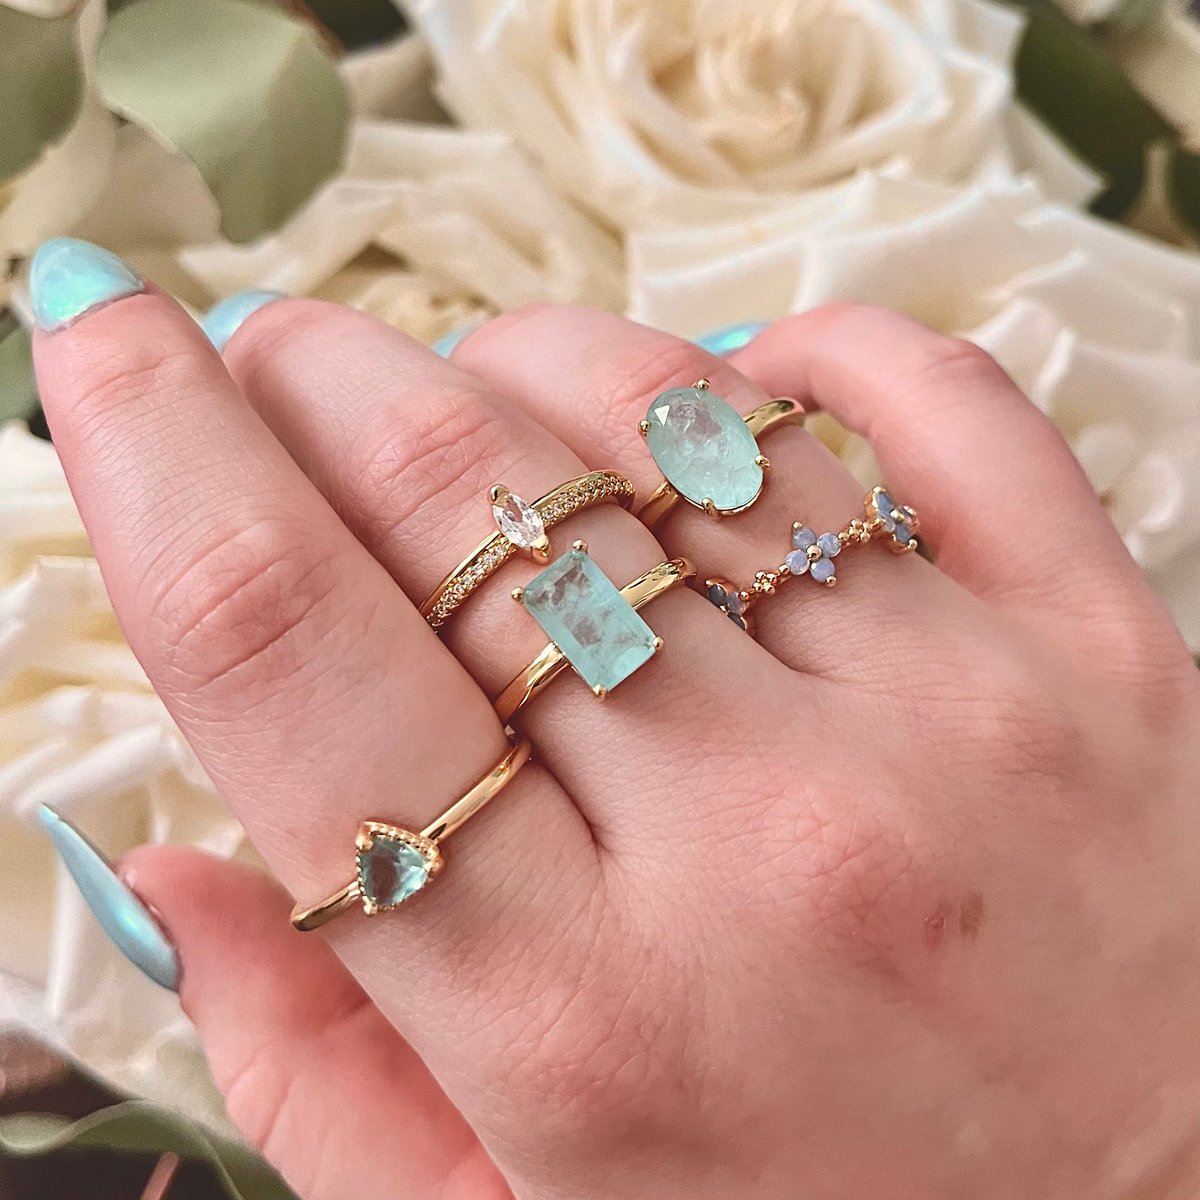 treat yourself to some jewelry…🤍